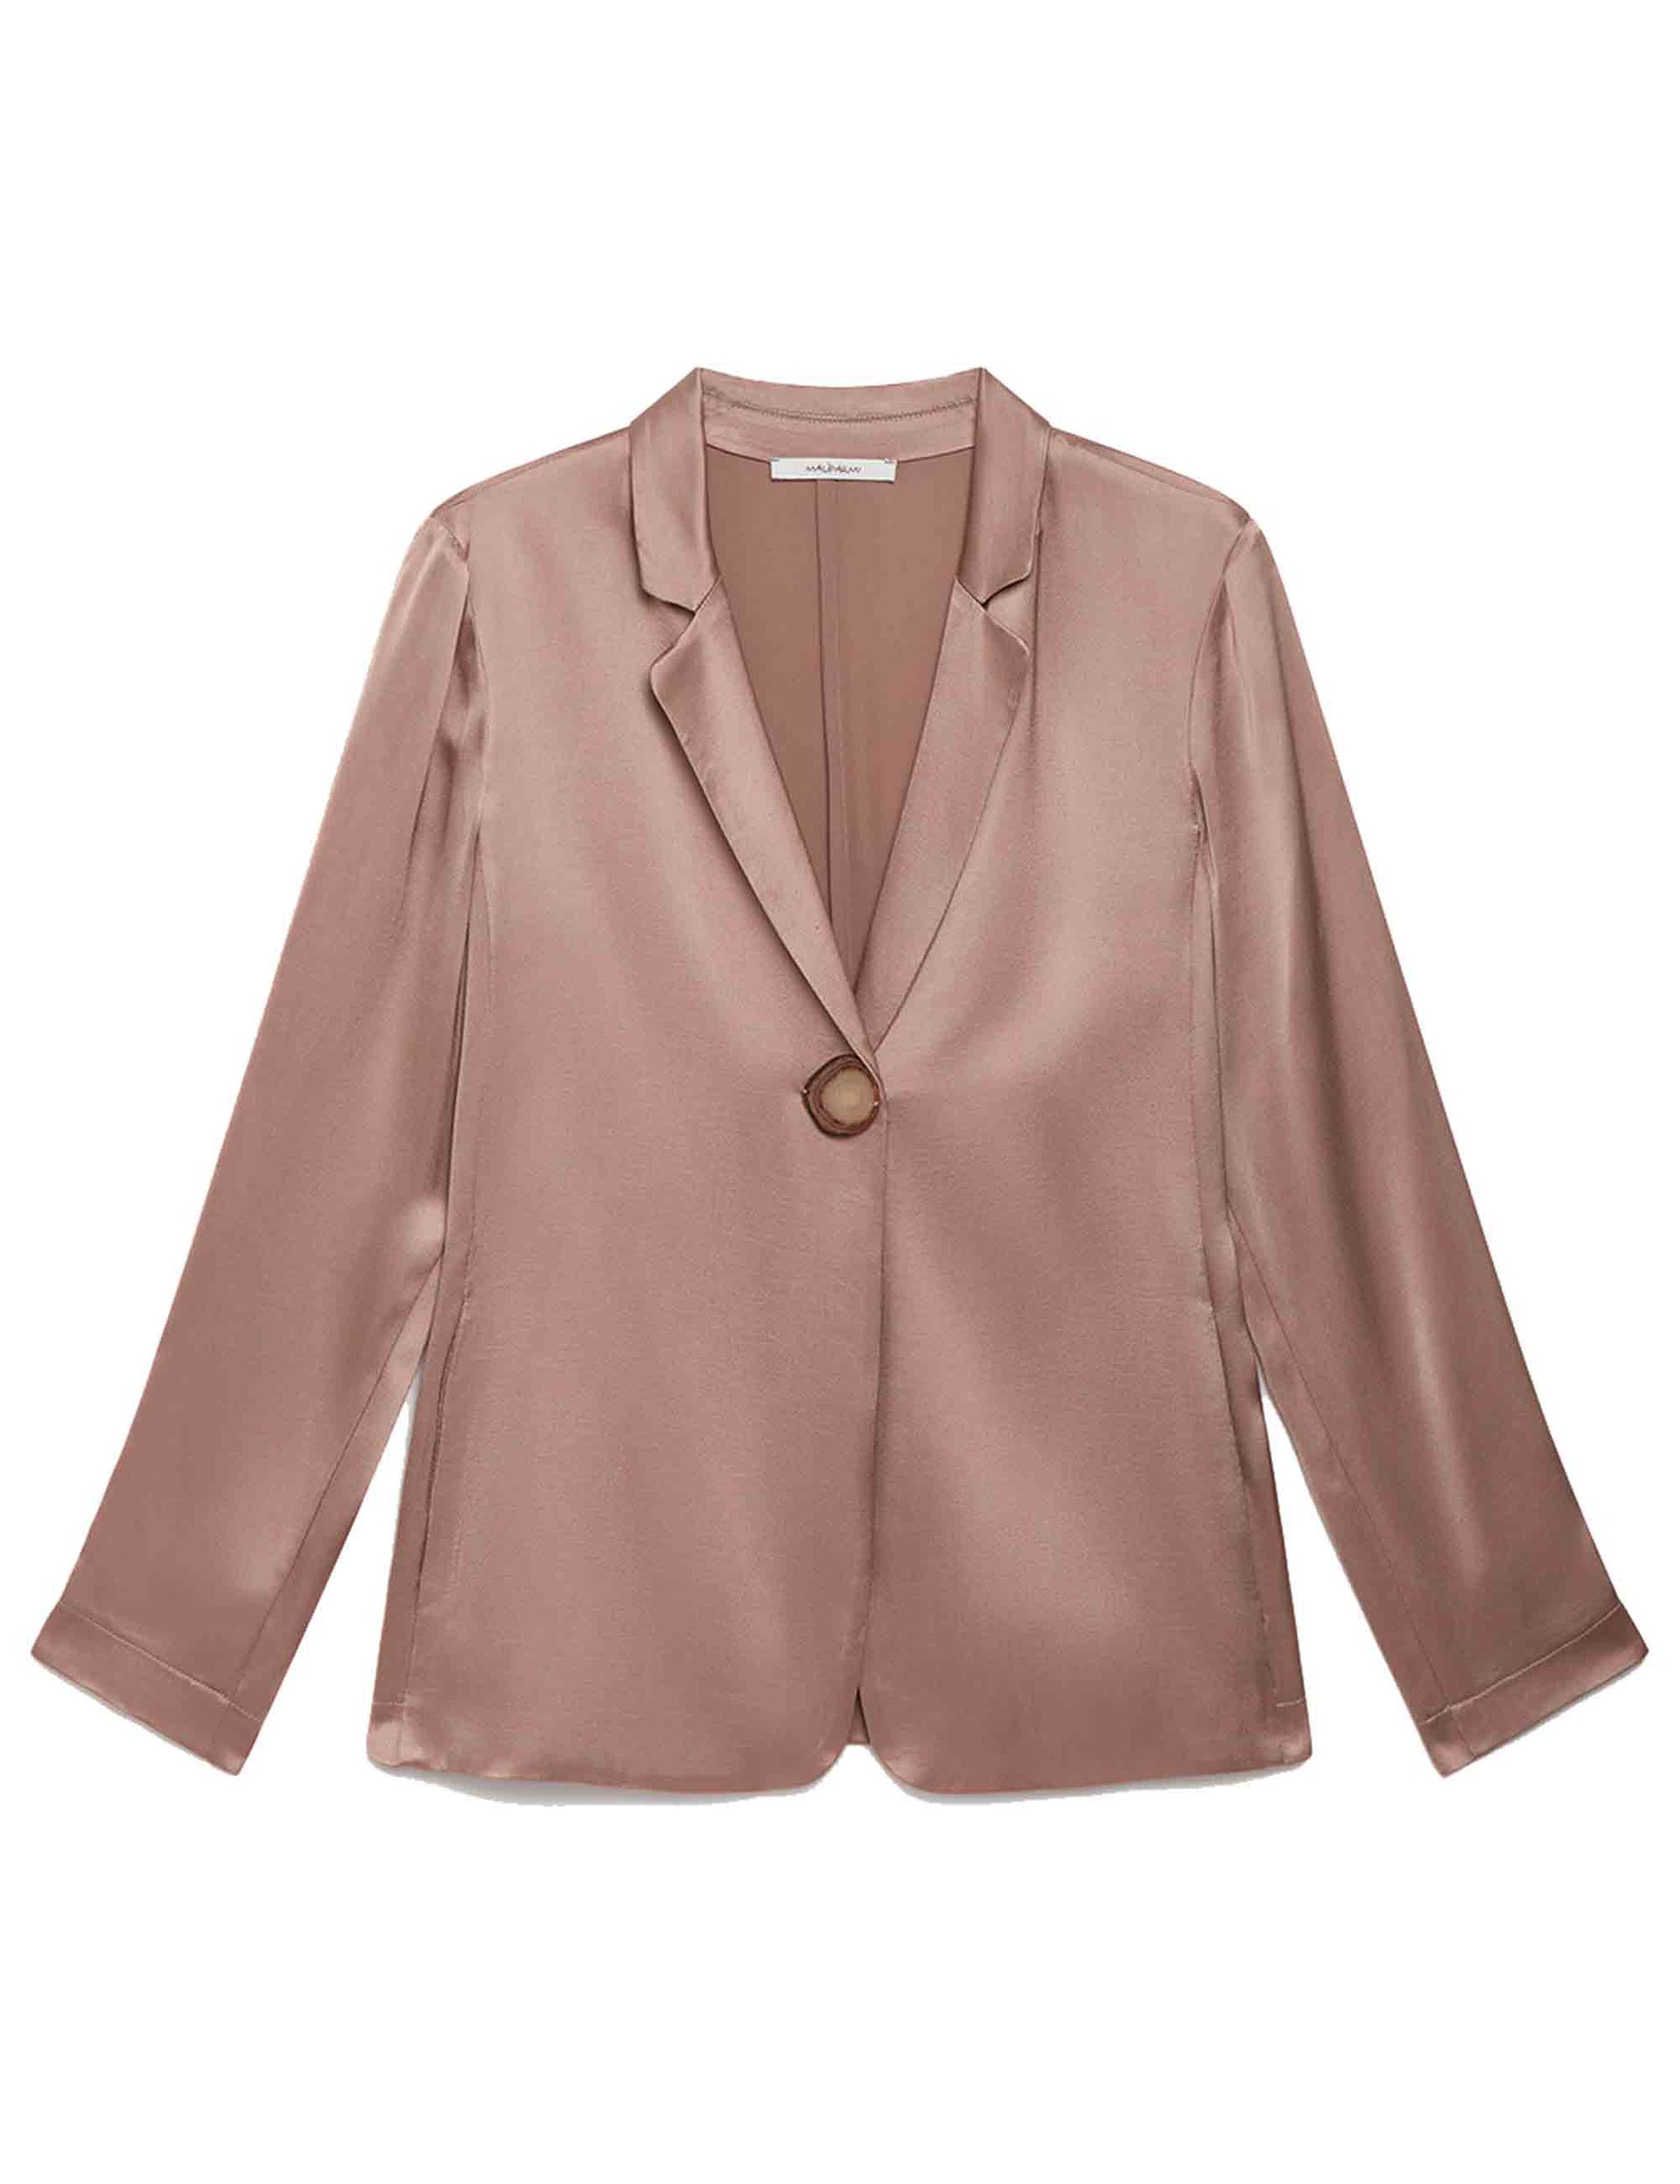 Shiny single-breasted women's jackets in walnut cady with special button